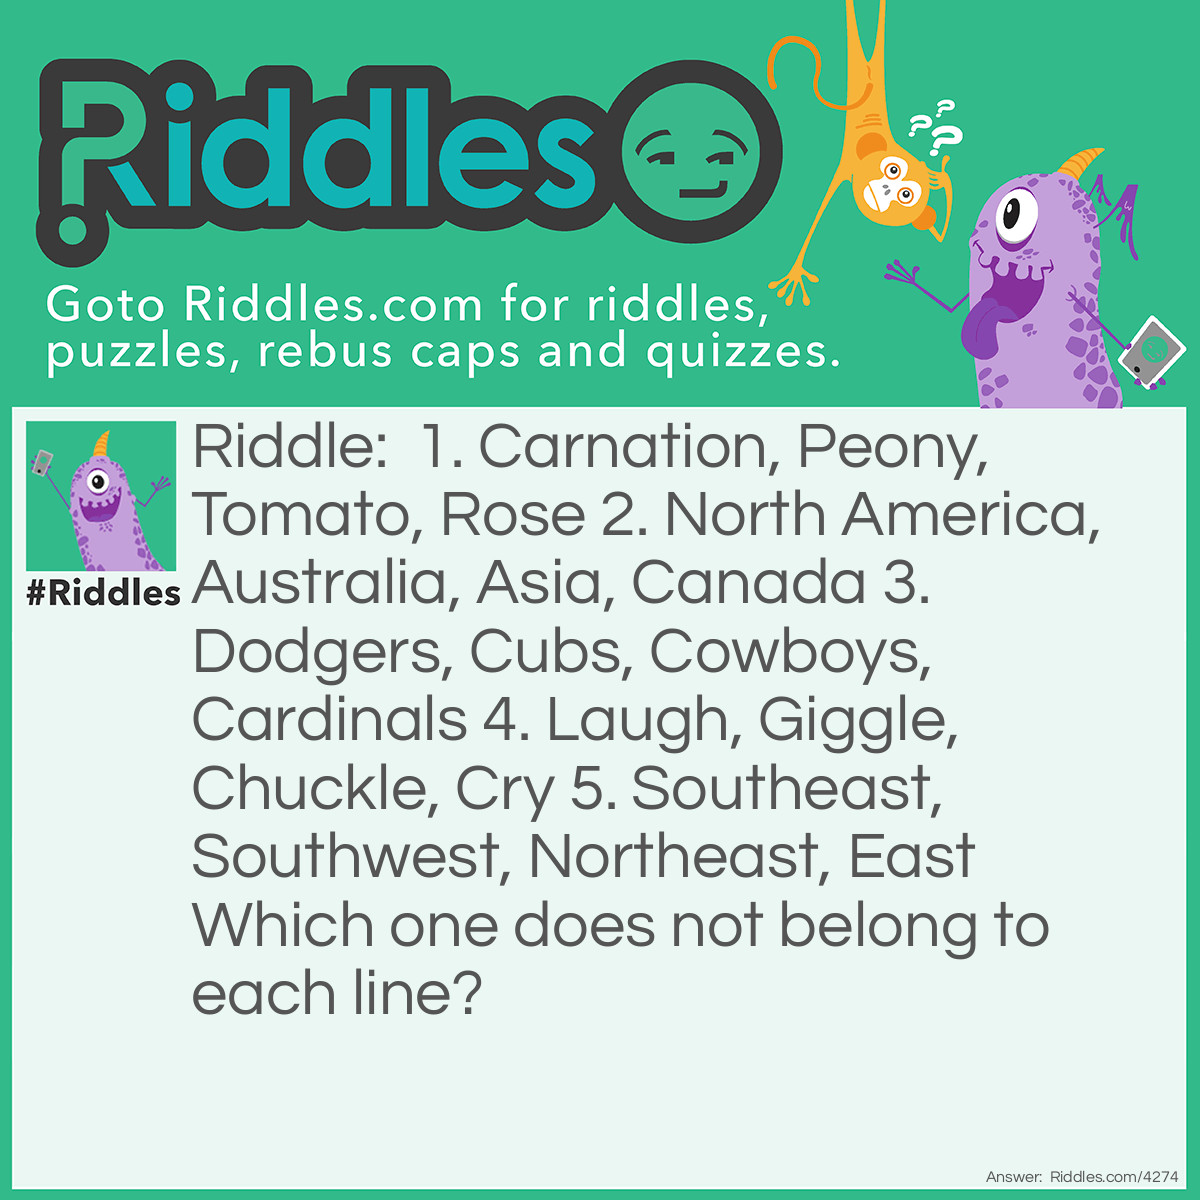 Riddle: 1. Carnation, Peony, Tomato, Rose 
2. North America, Australia, Asia, Canada 
3. Dodgers, Cubs, Cowboys, Cardinals 
4. Laugh, Giggle, Chuckle, Cry 
5. Southeast, Southwest, Northeast, East 
Which one does not belong to each line? Answer: 1.  Tomato because the others are all flowers.
2. Canada because the others are all continents.
3. Could be Dodgers  because it starts with a D or could be Cowboys because the others are baseball teams.
4. Cry because the others are about happiness and being glad.
5. East because the others are intermediate directions.  